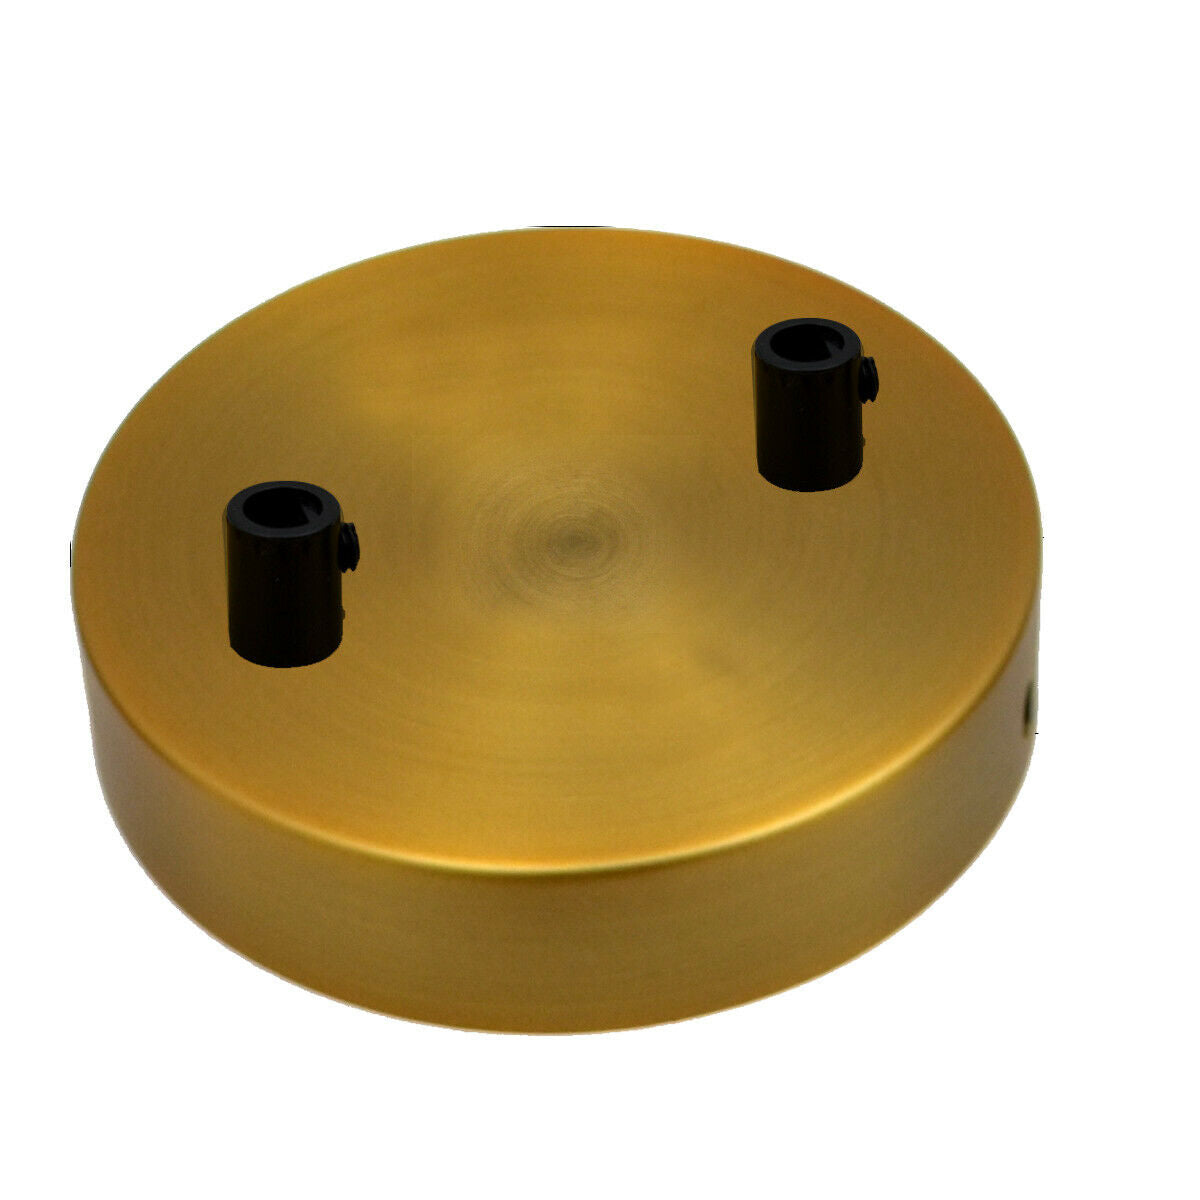 2 Outlet Yellow Brass Metal Ceiling Rose 120x25mm - Shop for LED lights - Transformers - Lampshades - Holders | LEDSone UK